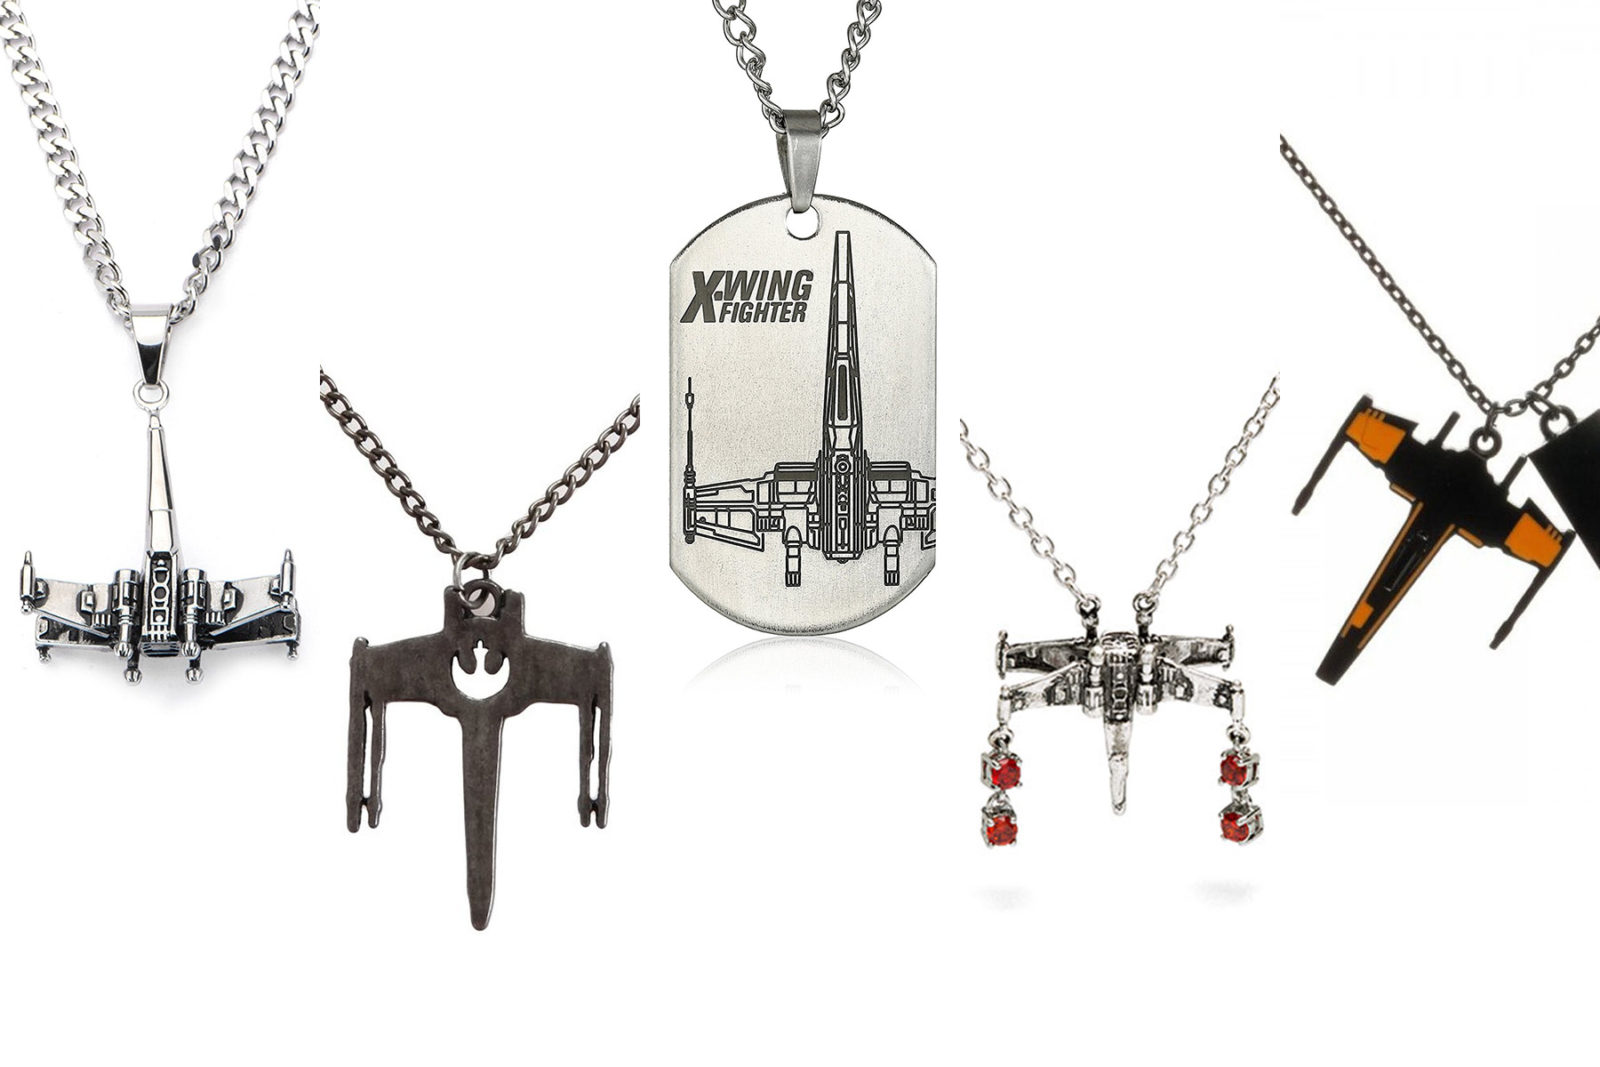 Leia's List - Star Wars X-Wing Fighter necklaces